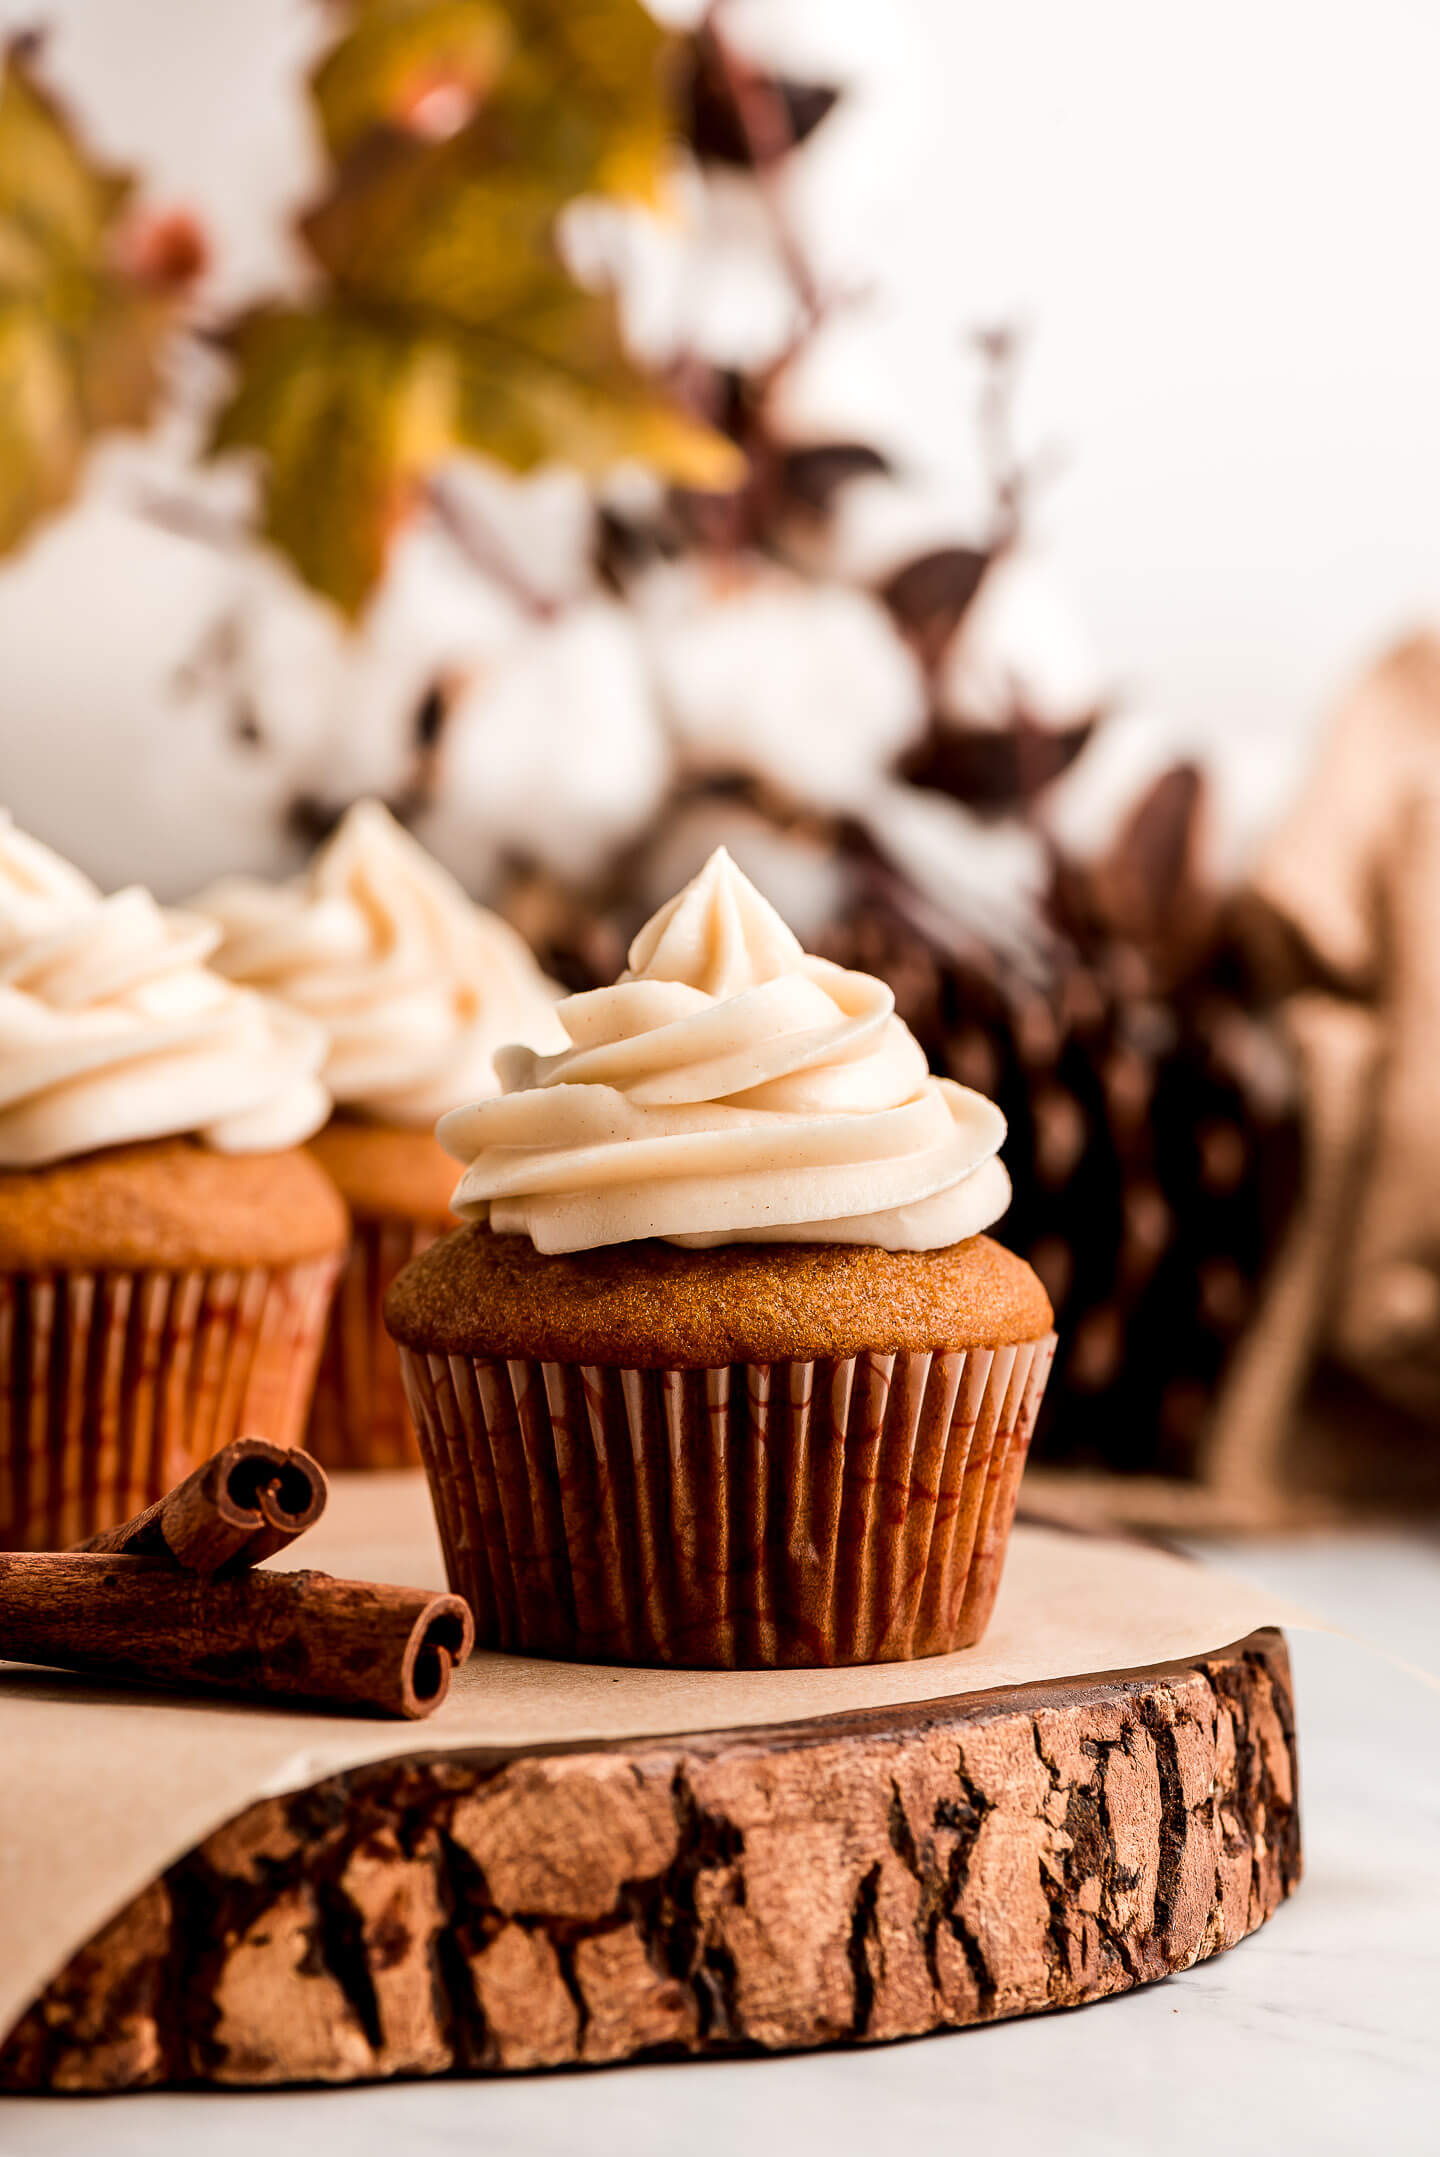 A Pumpkin Cupcake topped with cinnamon Cream Cheese Frosting on a wood slice cake stand.